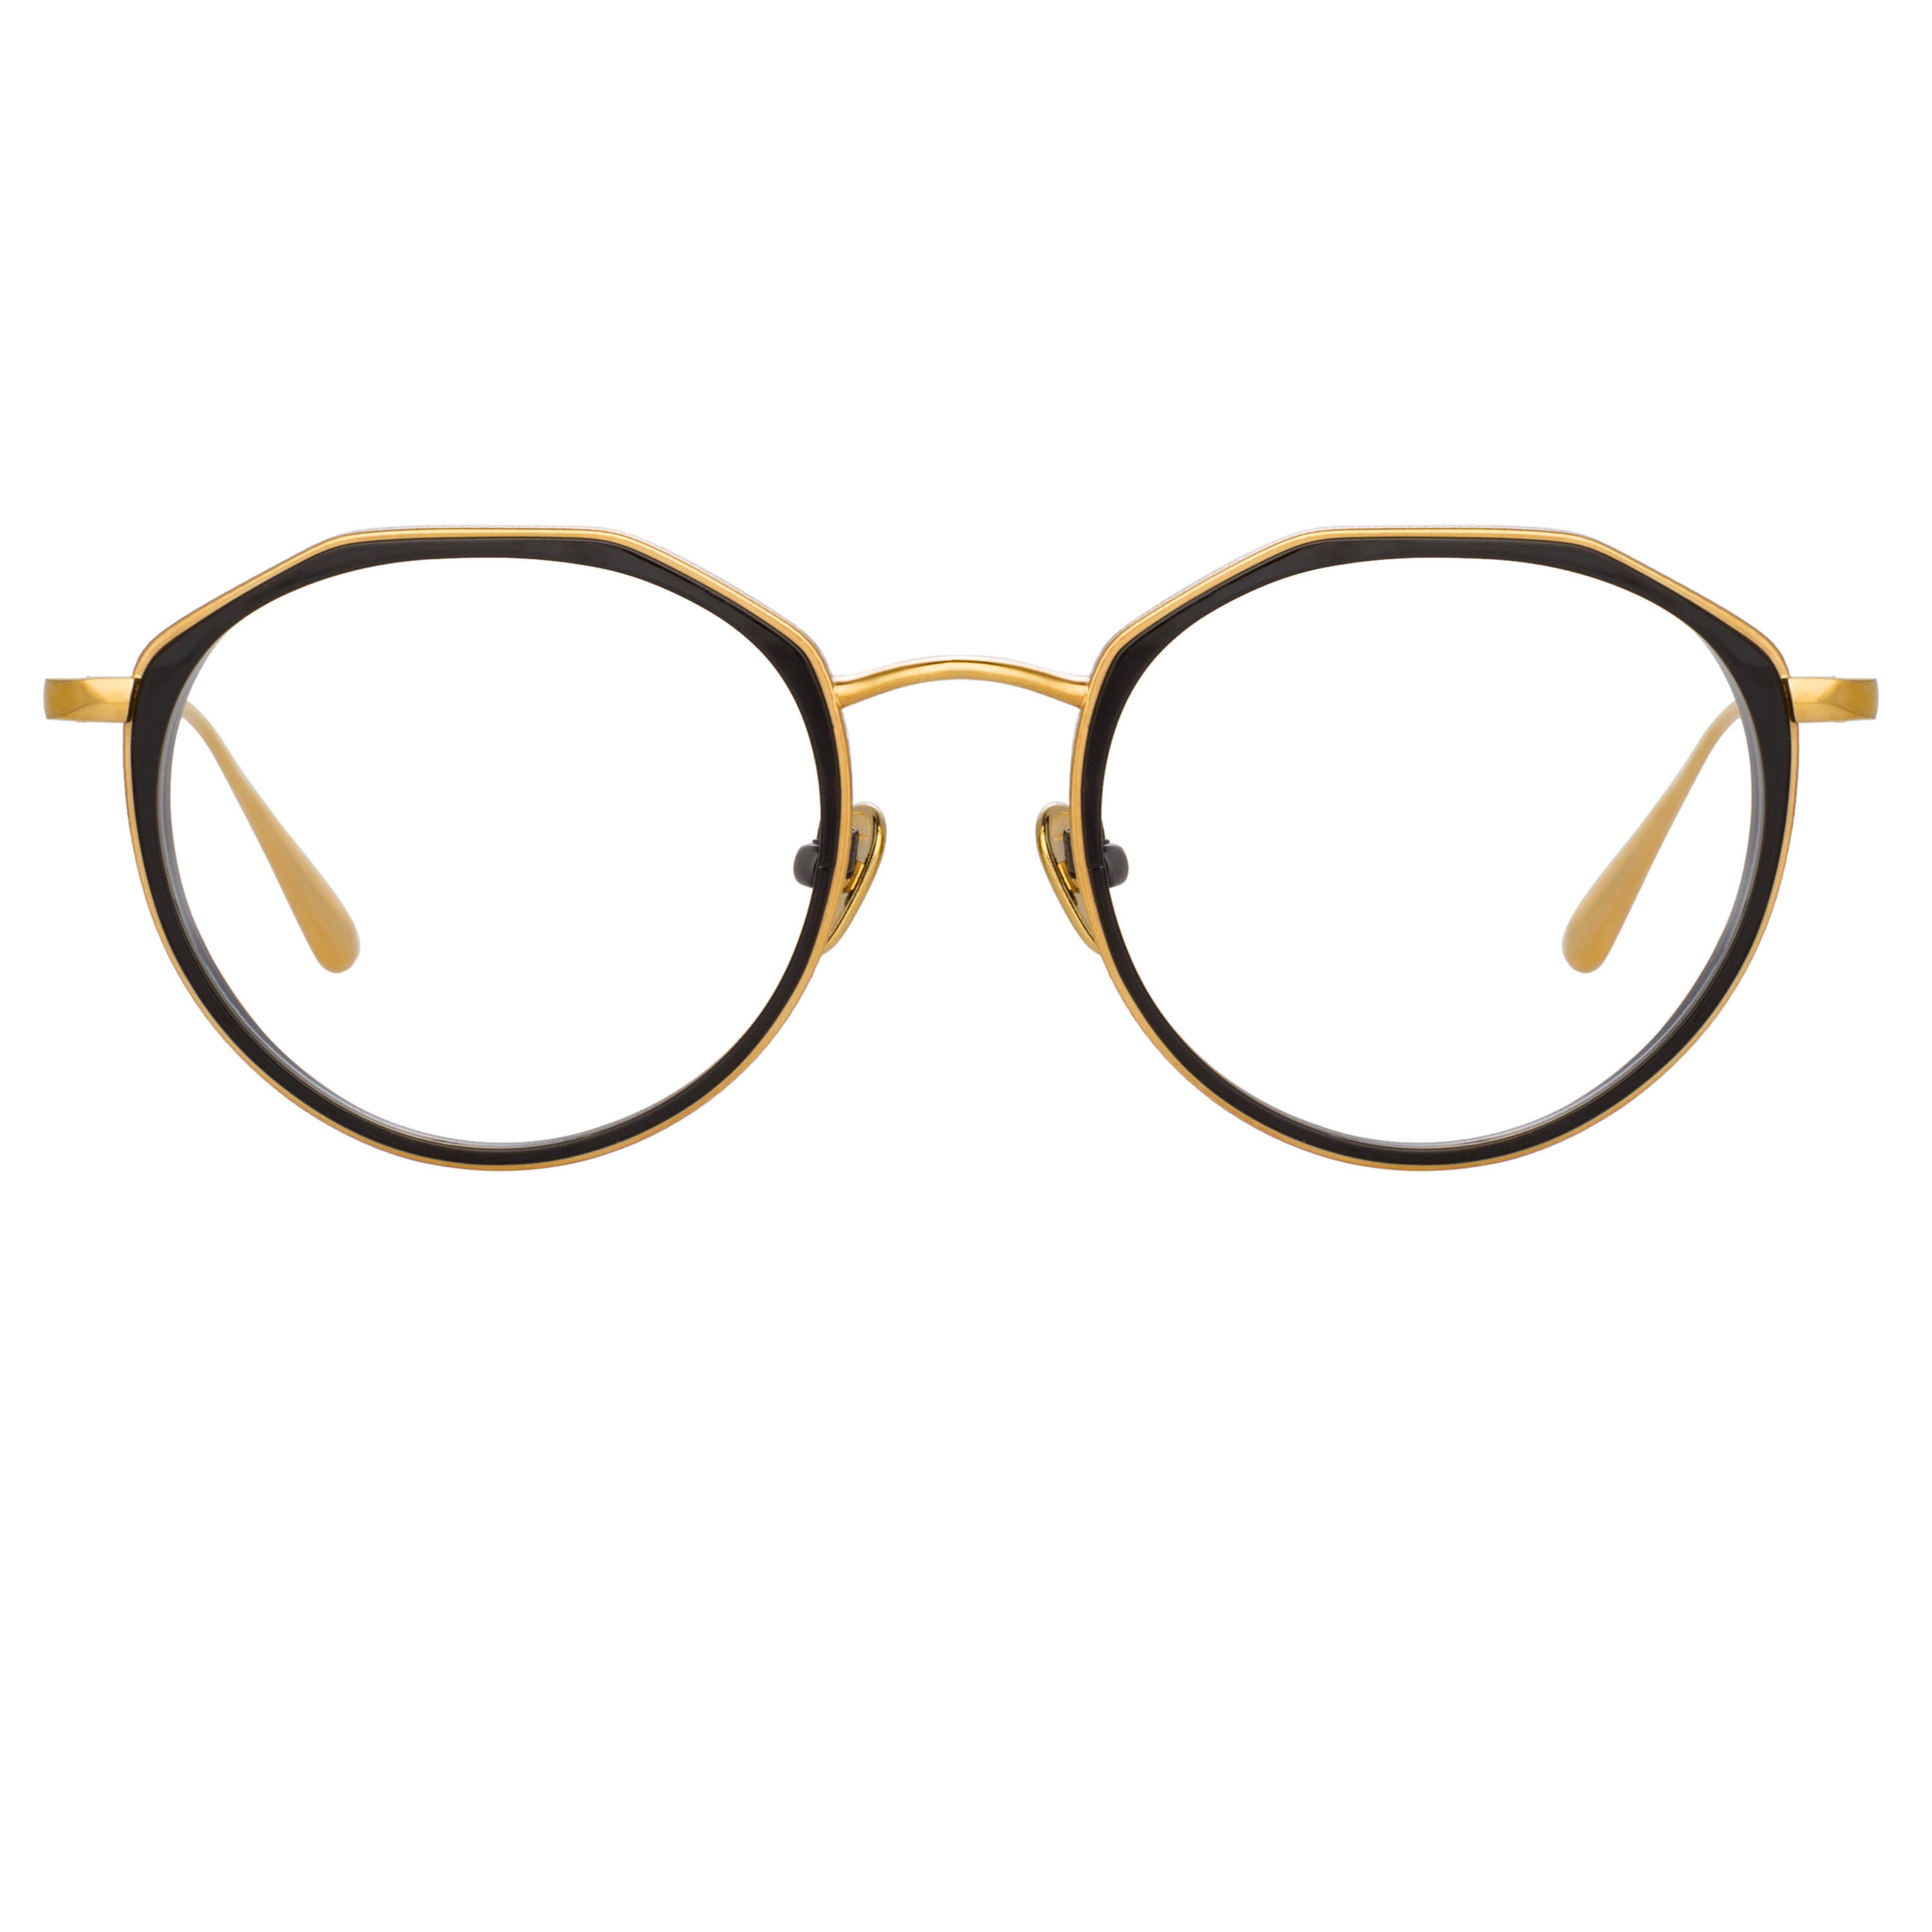 Cesar Angular Optical Frame in Yellow Gold and Black (Men’s)